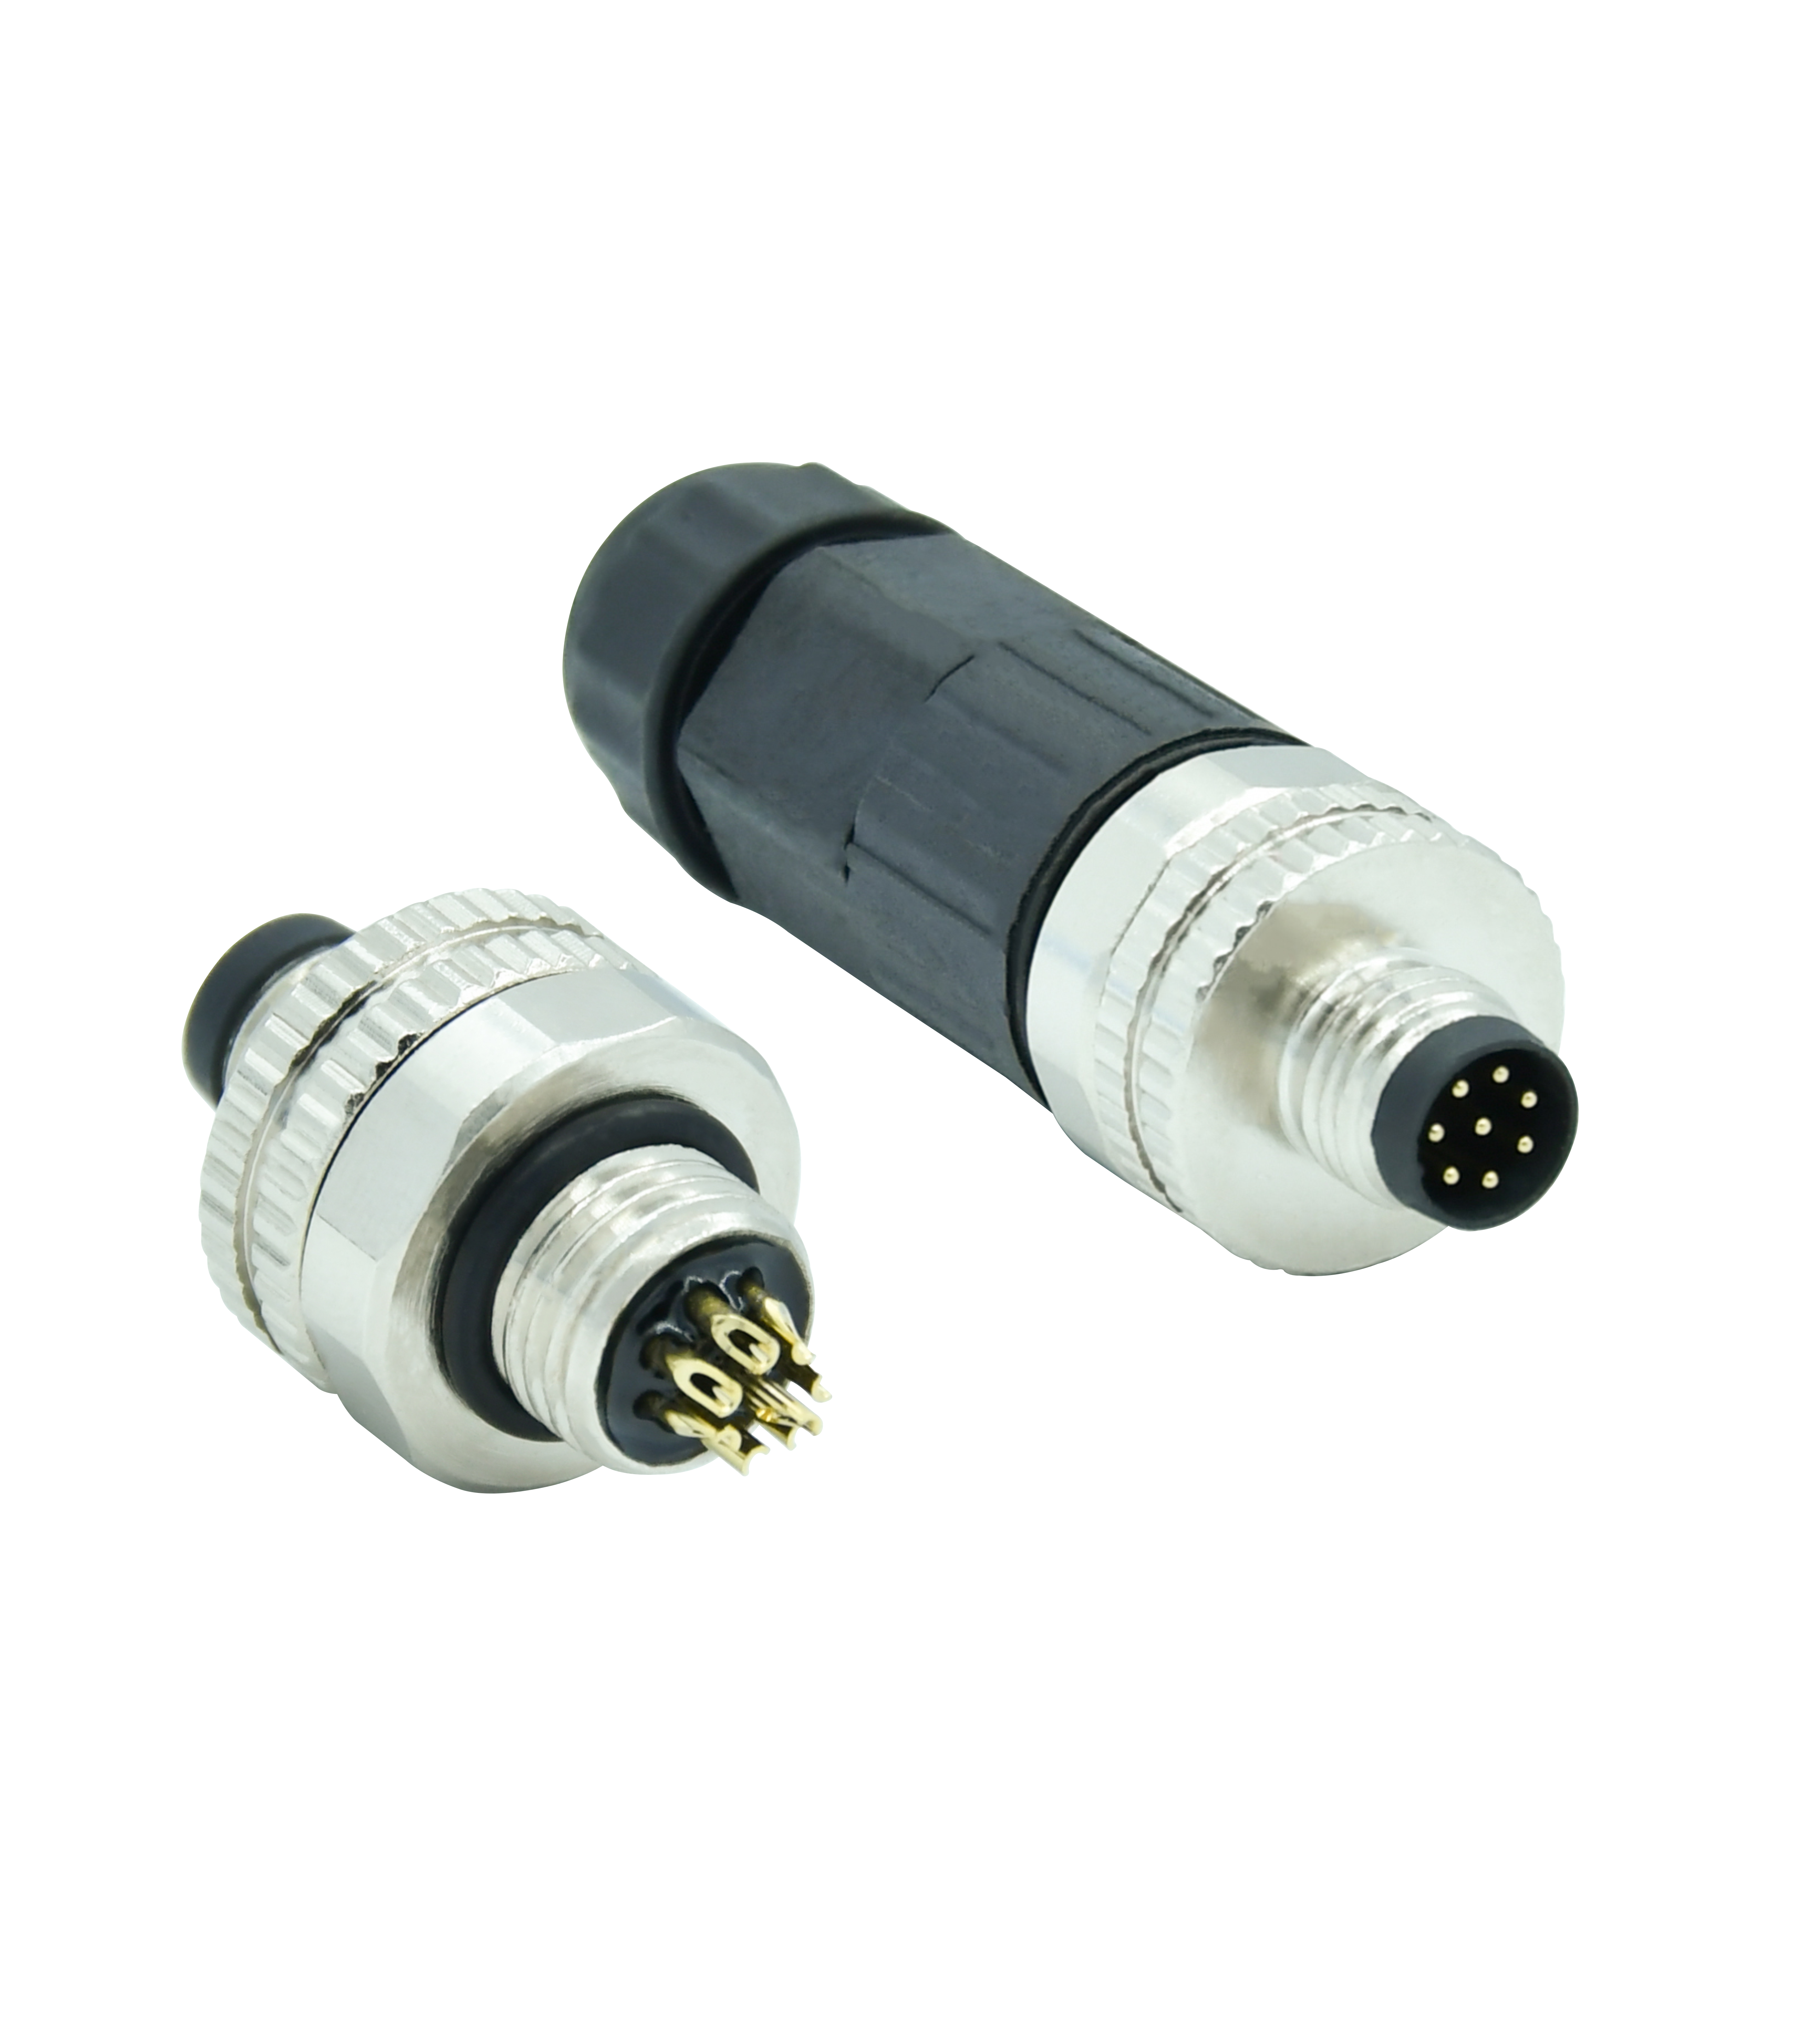 Rigoal M8 Connectors: Precision Engineering for Robust Industrial Solutions